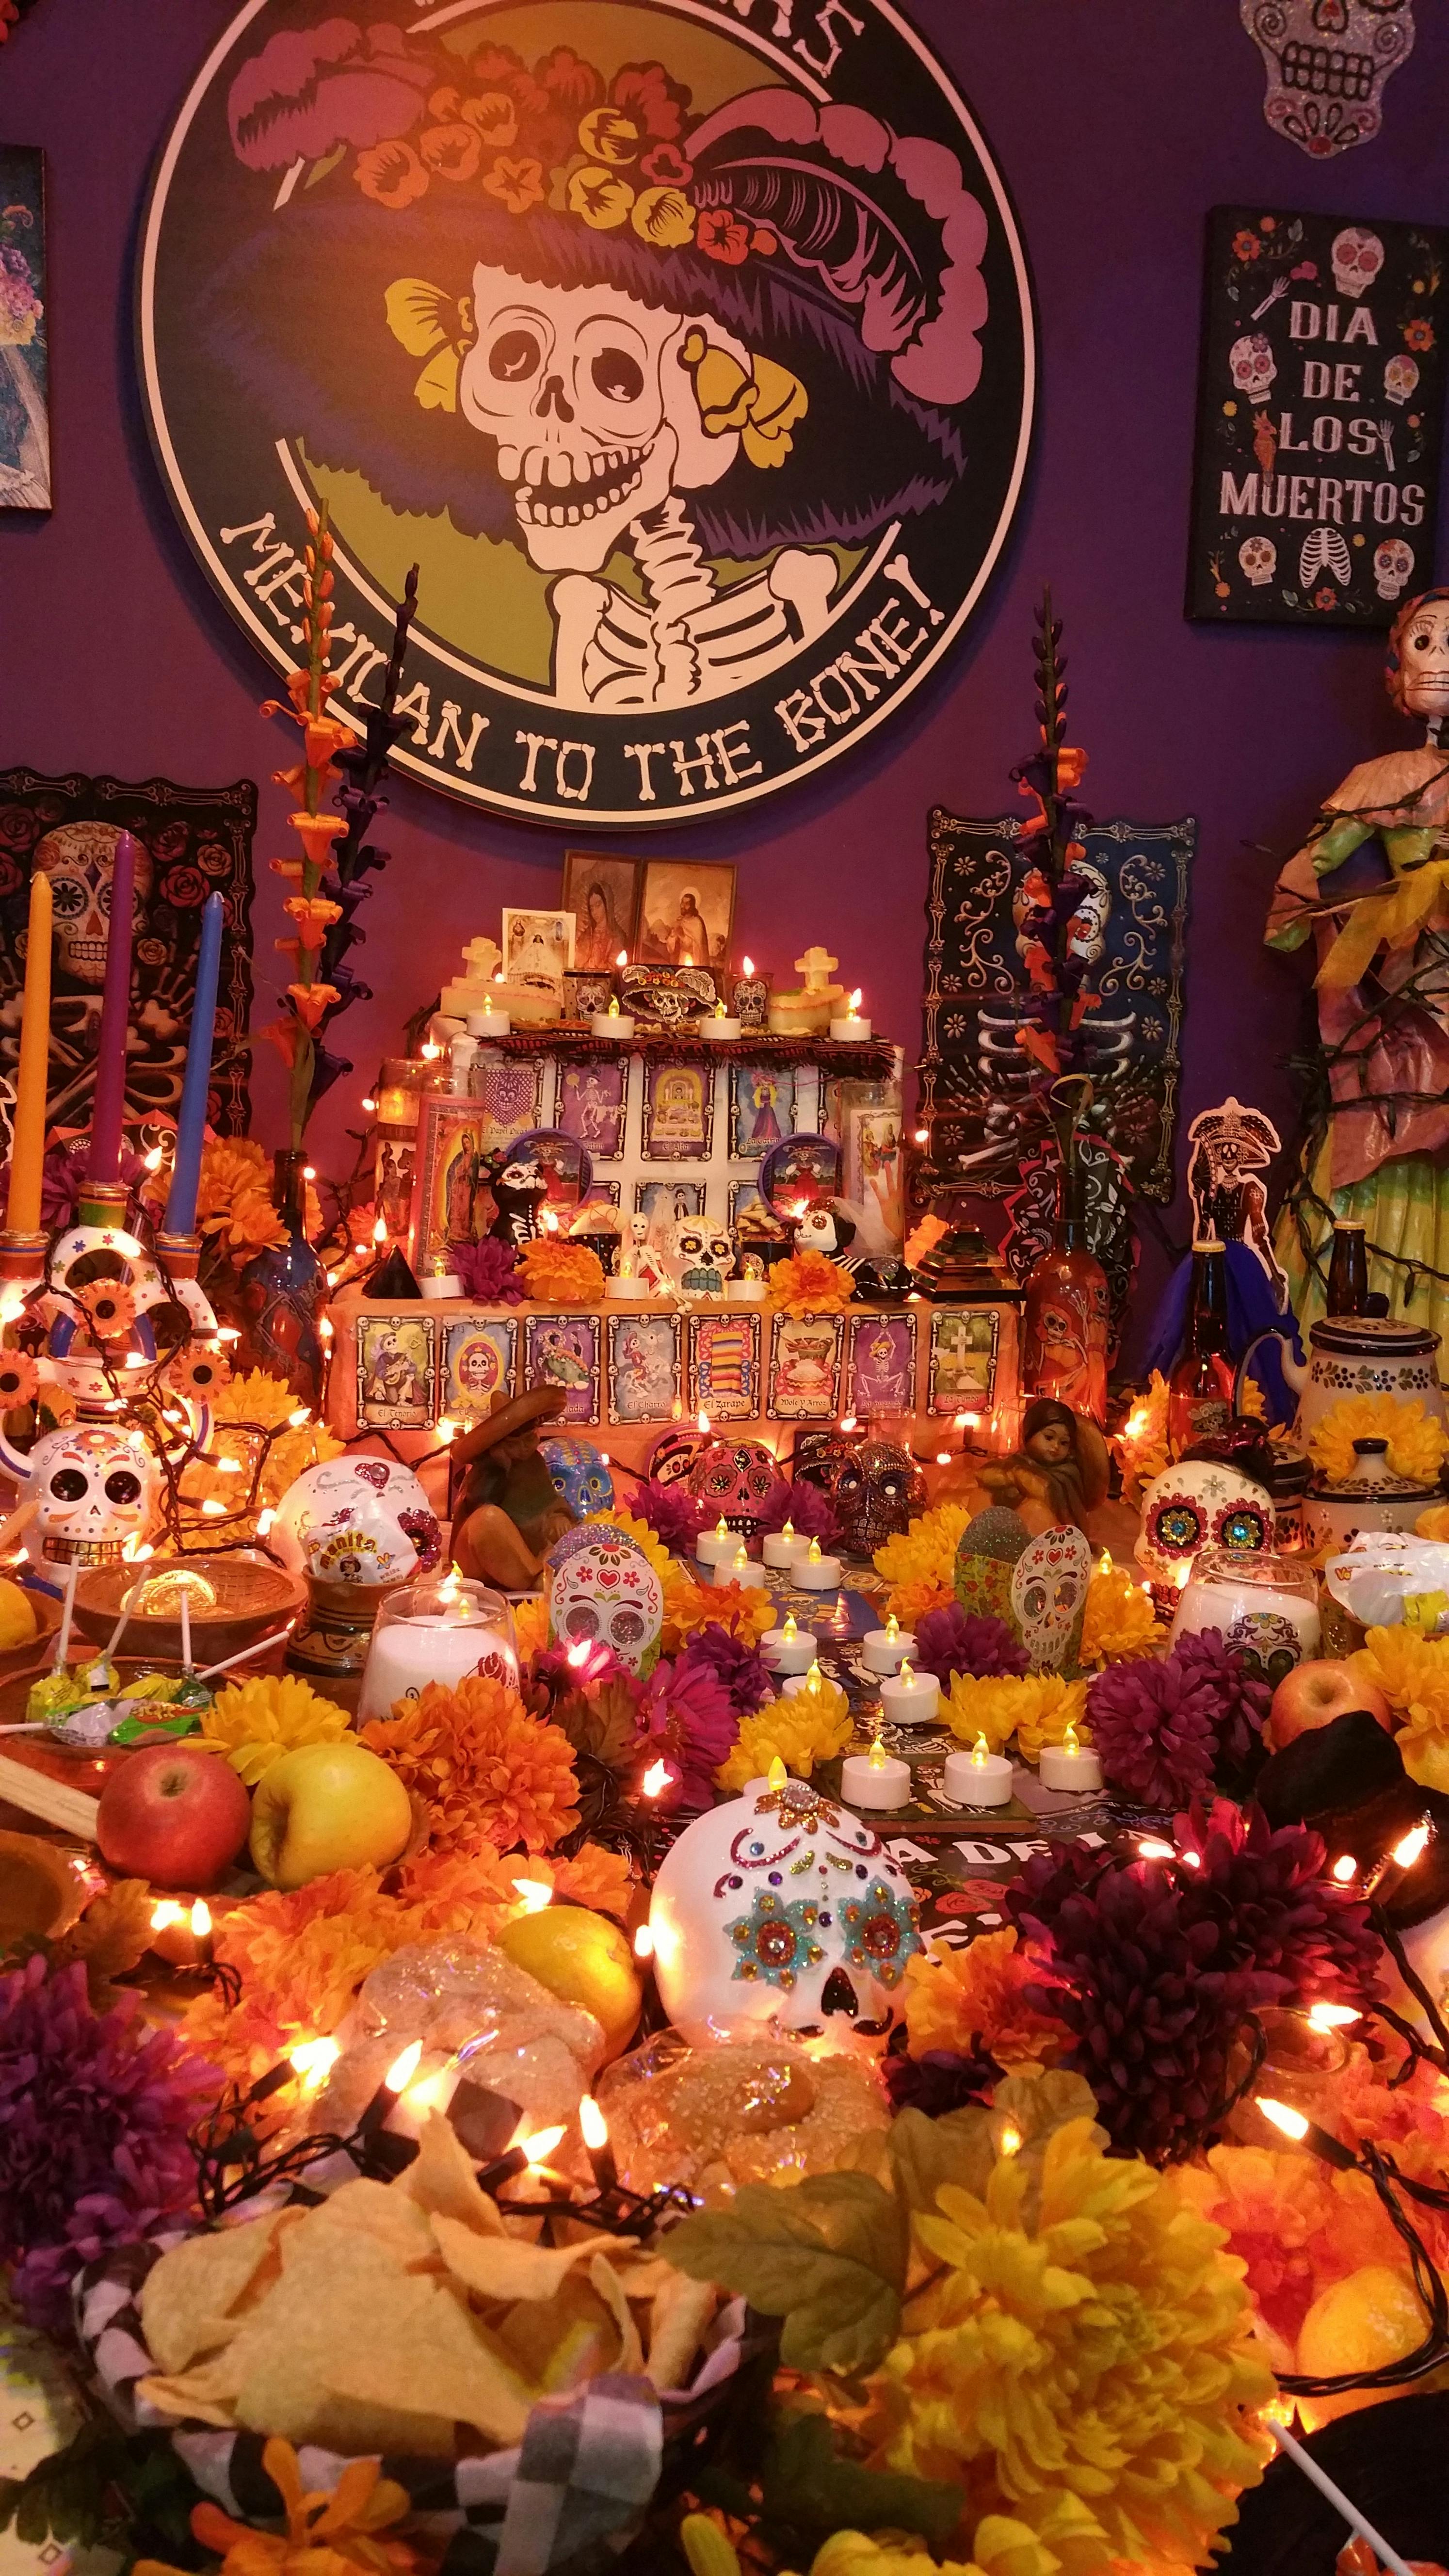 Free stock photo of day of the dead, latin american memorial to the dead, memorial to the dead